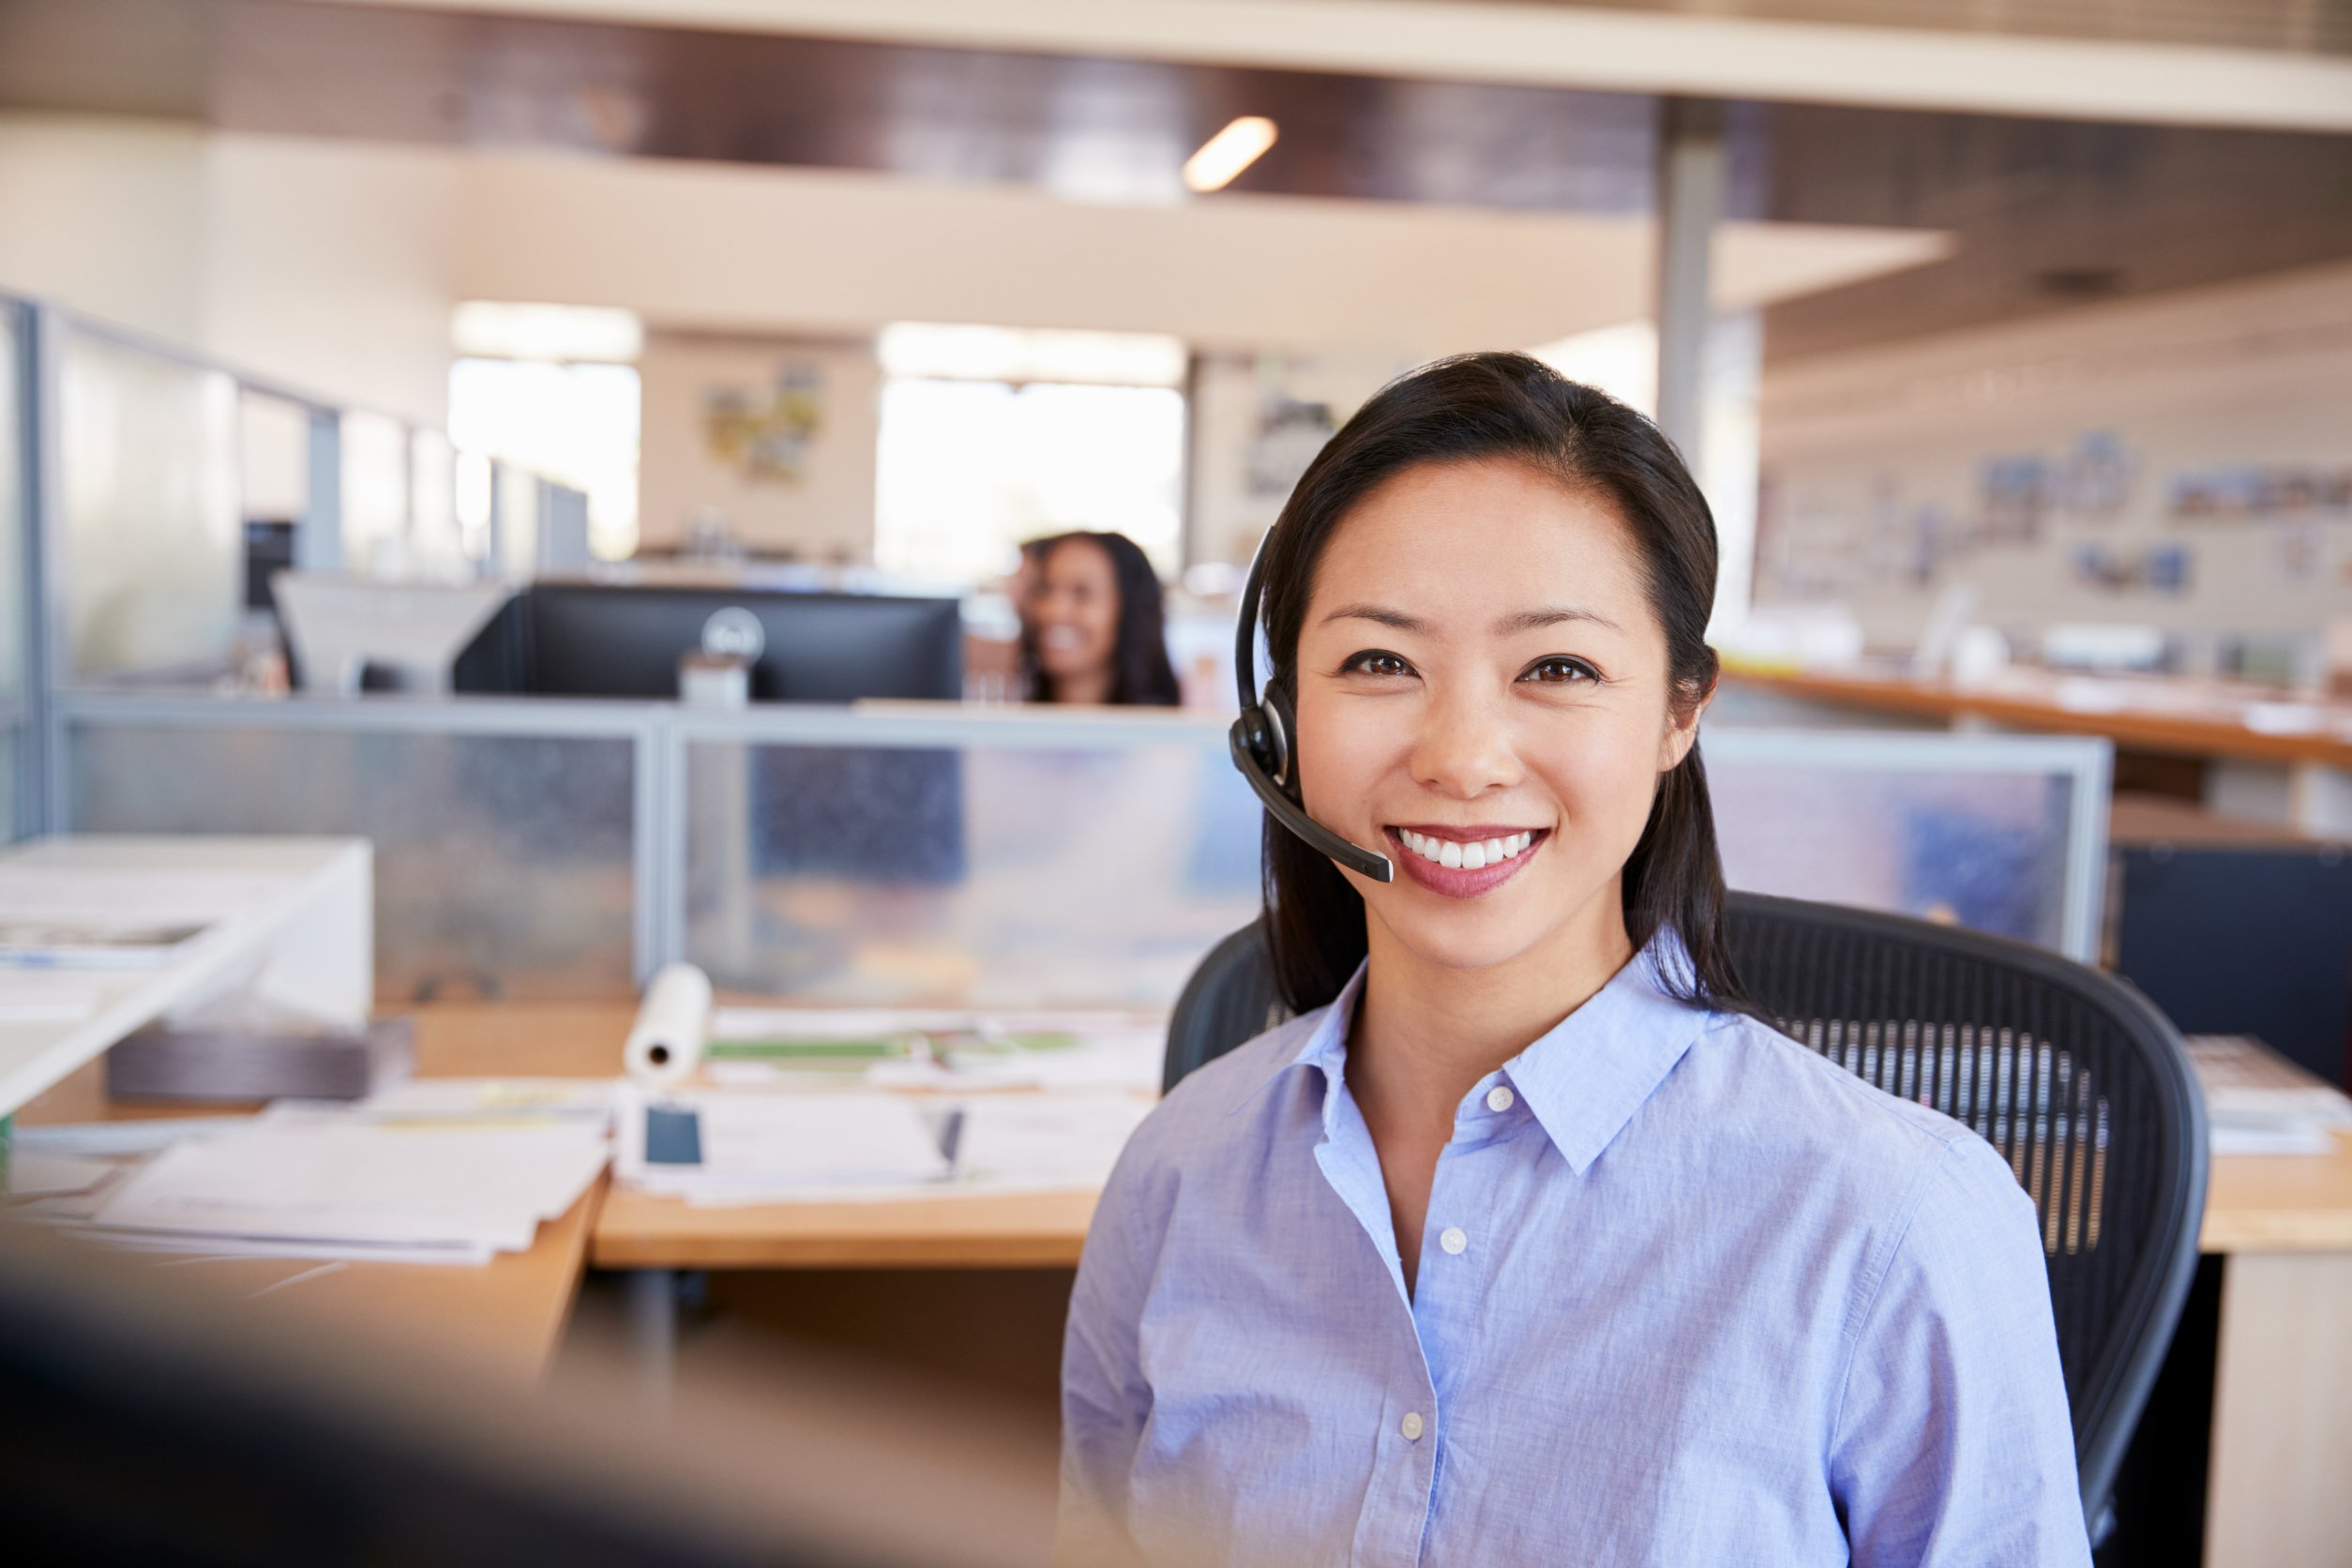 Female customer service representative wearing a microphone headset, sitting at a computer. Other customer service representatives are visible in the background.